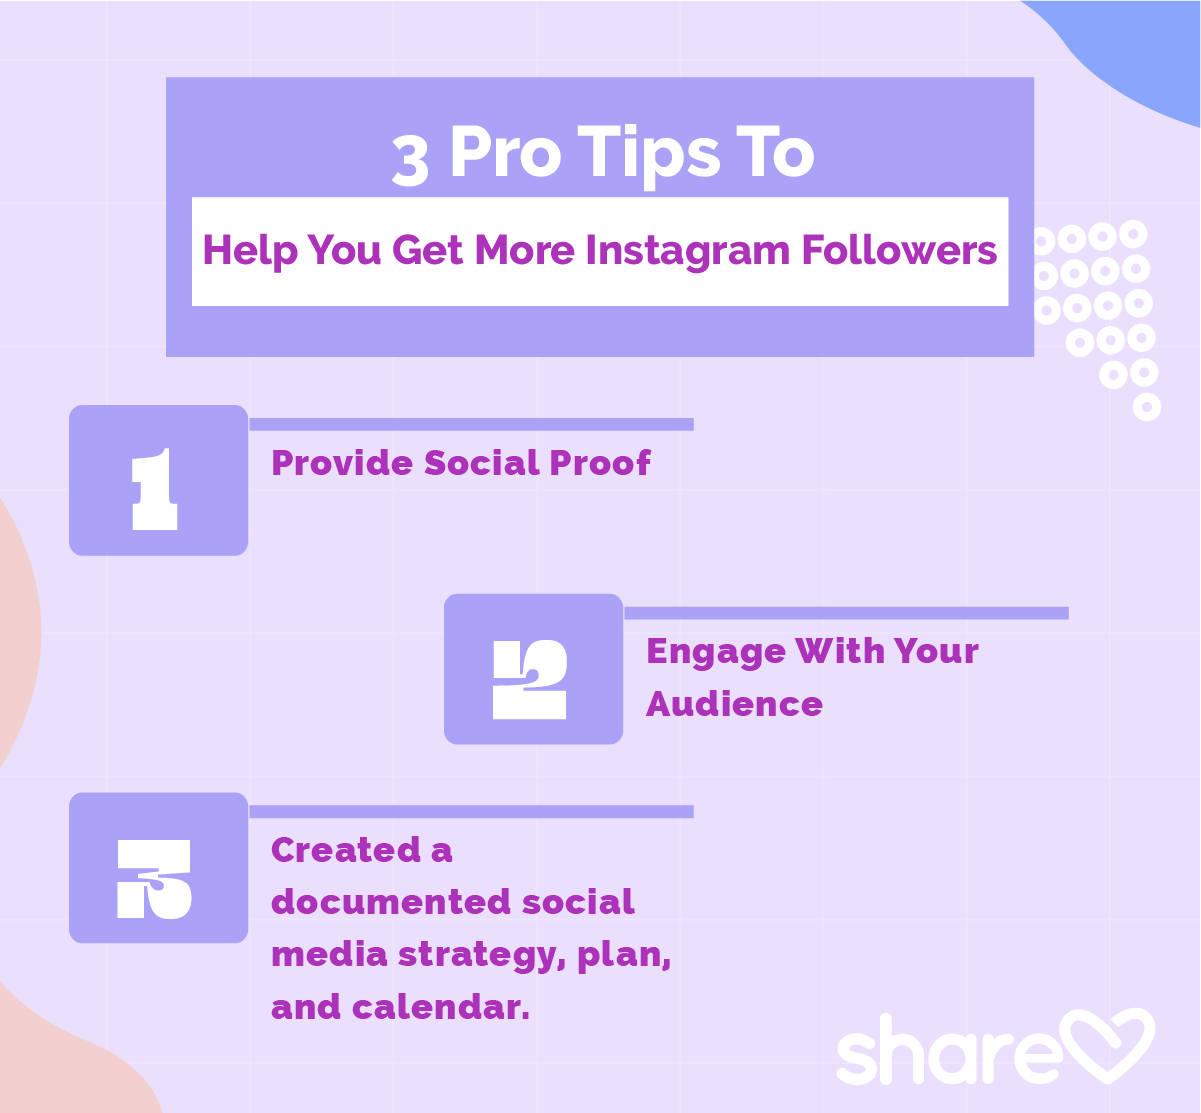 3 Pro Tips To Help You Get More Instagram Followers